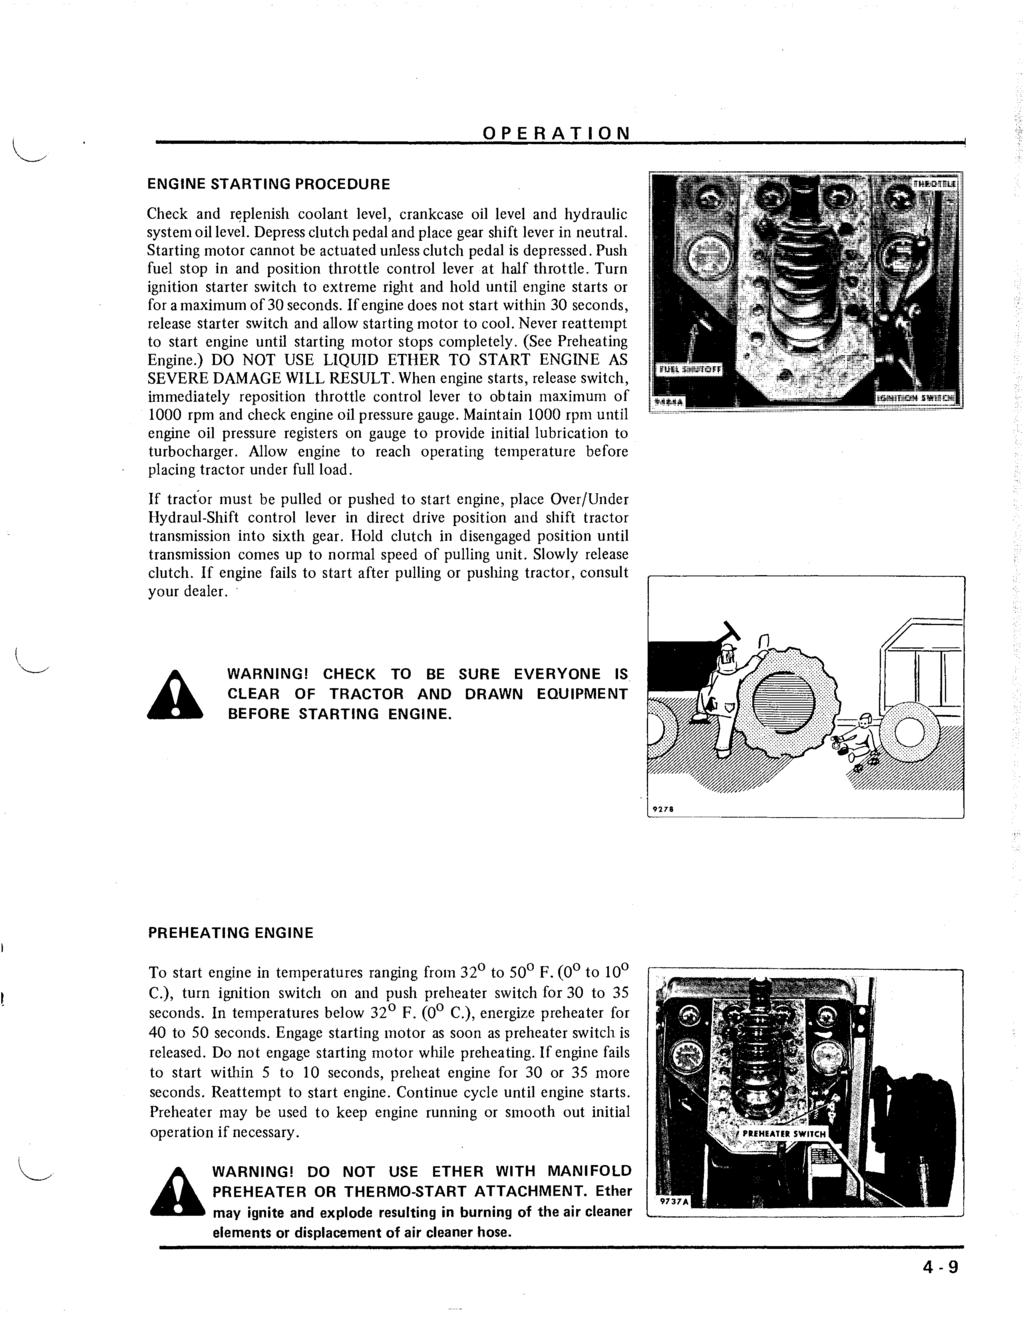 OPERATION ENGINE STARTING PROCEDURE Check and r~plenish coolant level, crankcase oil level and hydraulic system oil level. Depress clutch pedal and place gear shift lever in neutral.